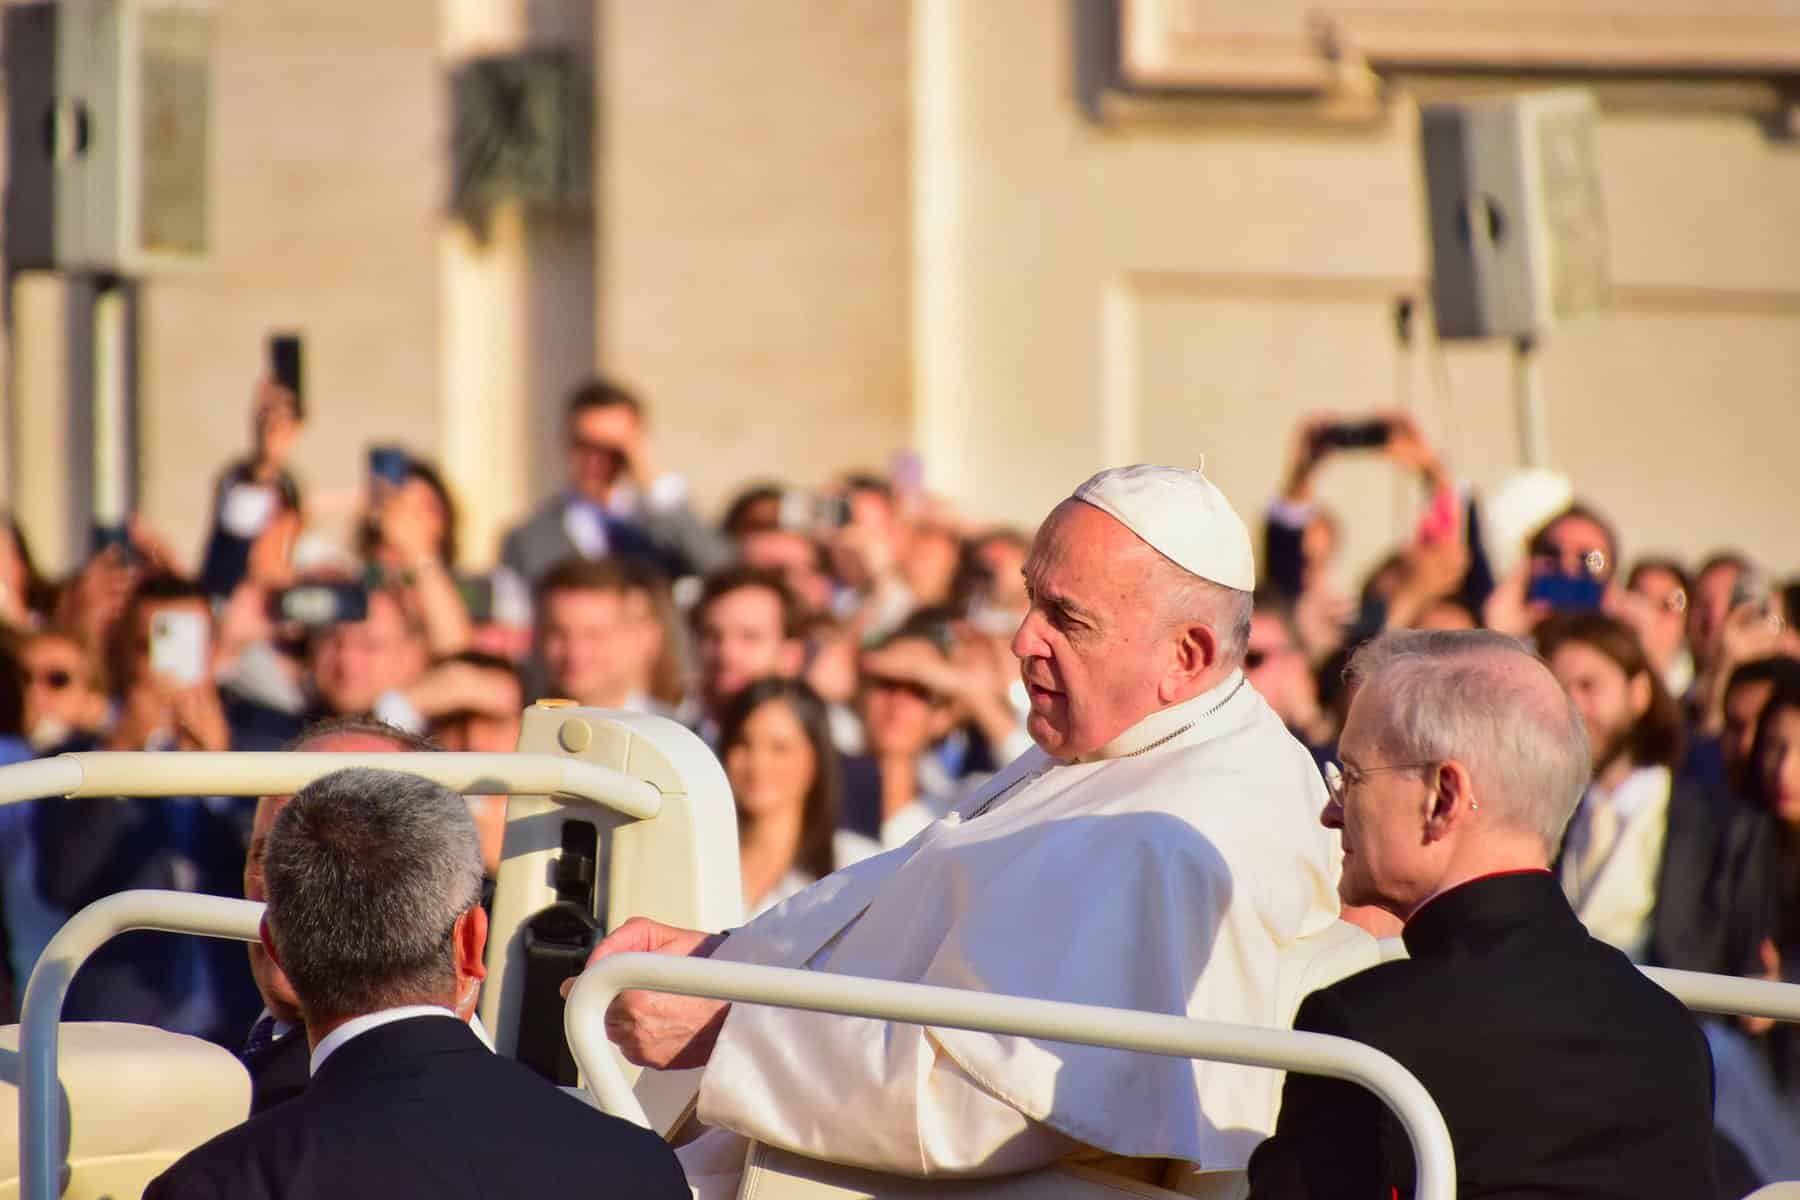 Pope Francis is shown riding through a crowd in the "Pope-mobile".